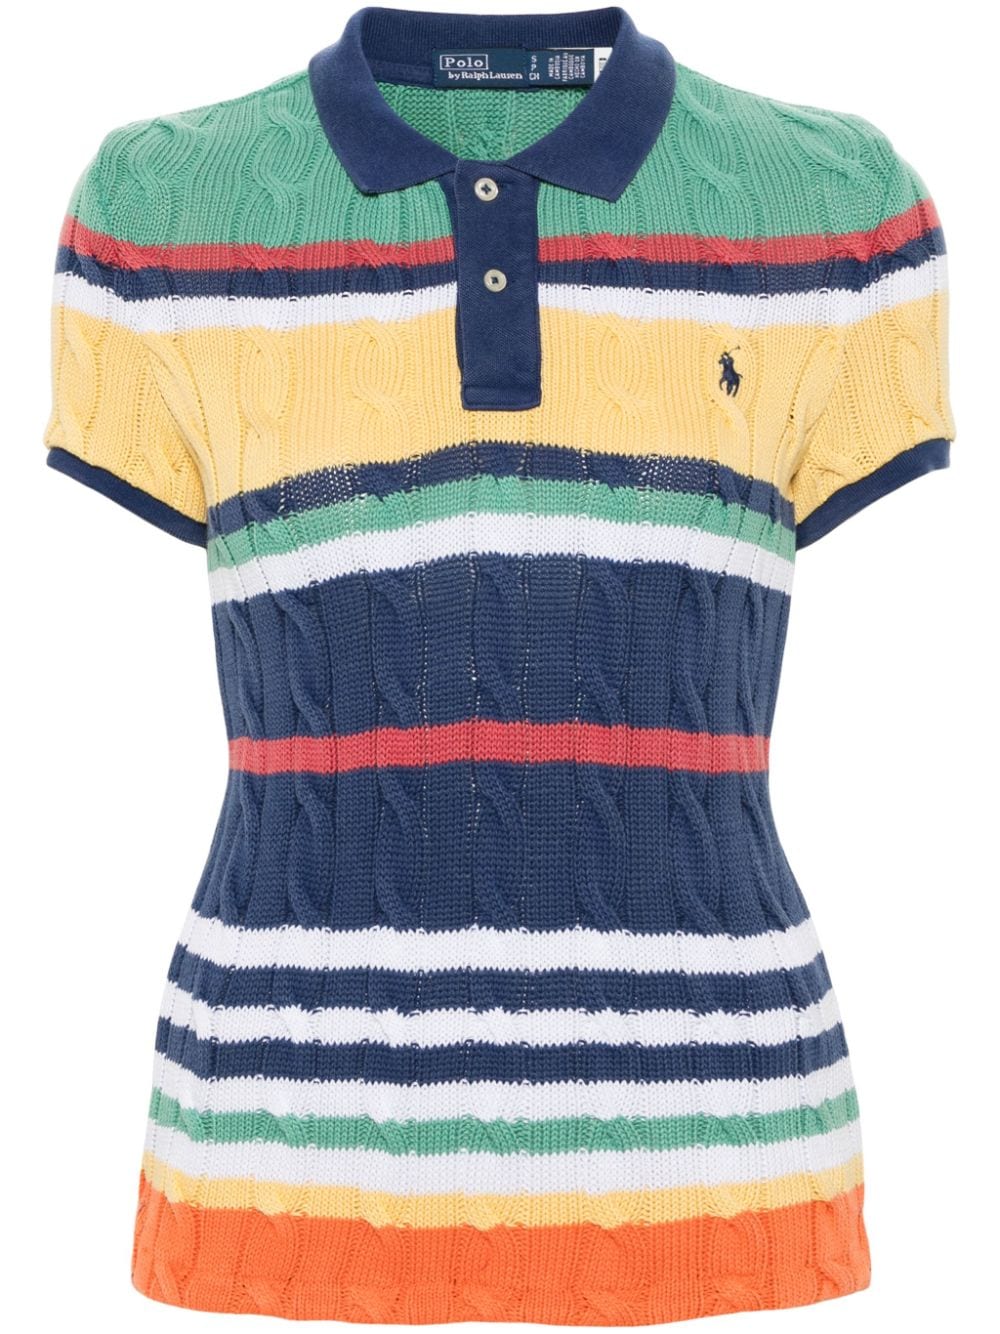 POLO RALPH LAUREN STRIPED CABLE-KNIT POLO TOP